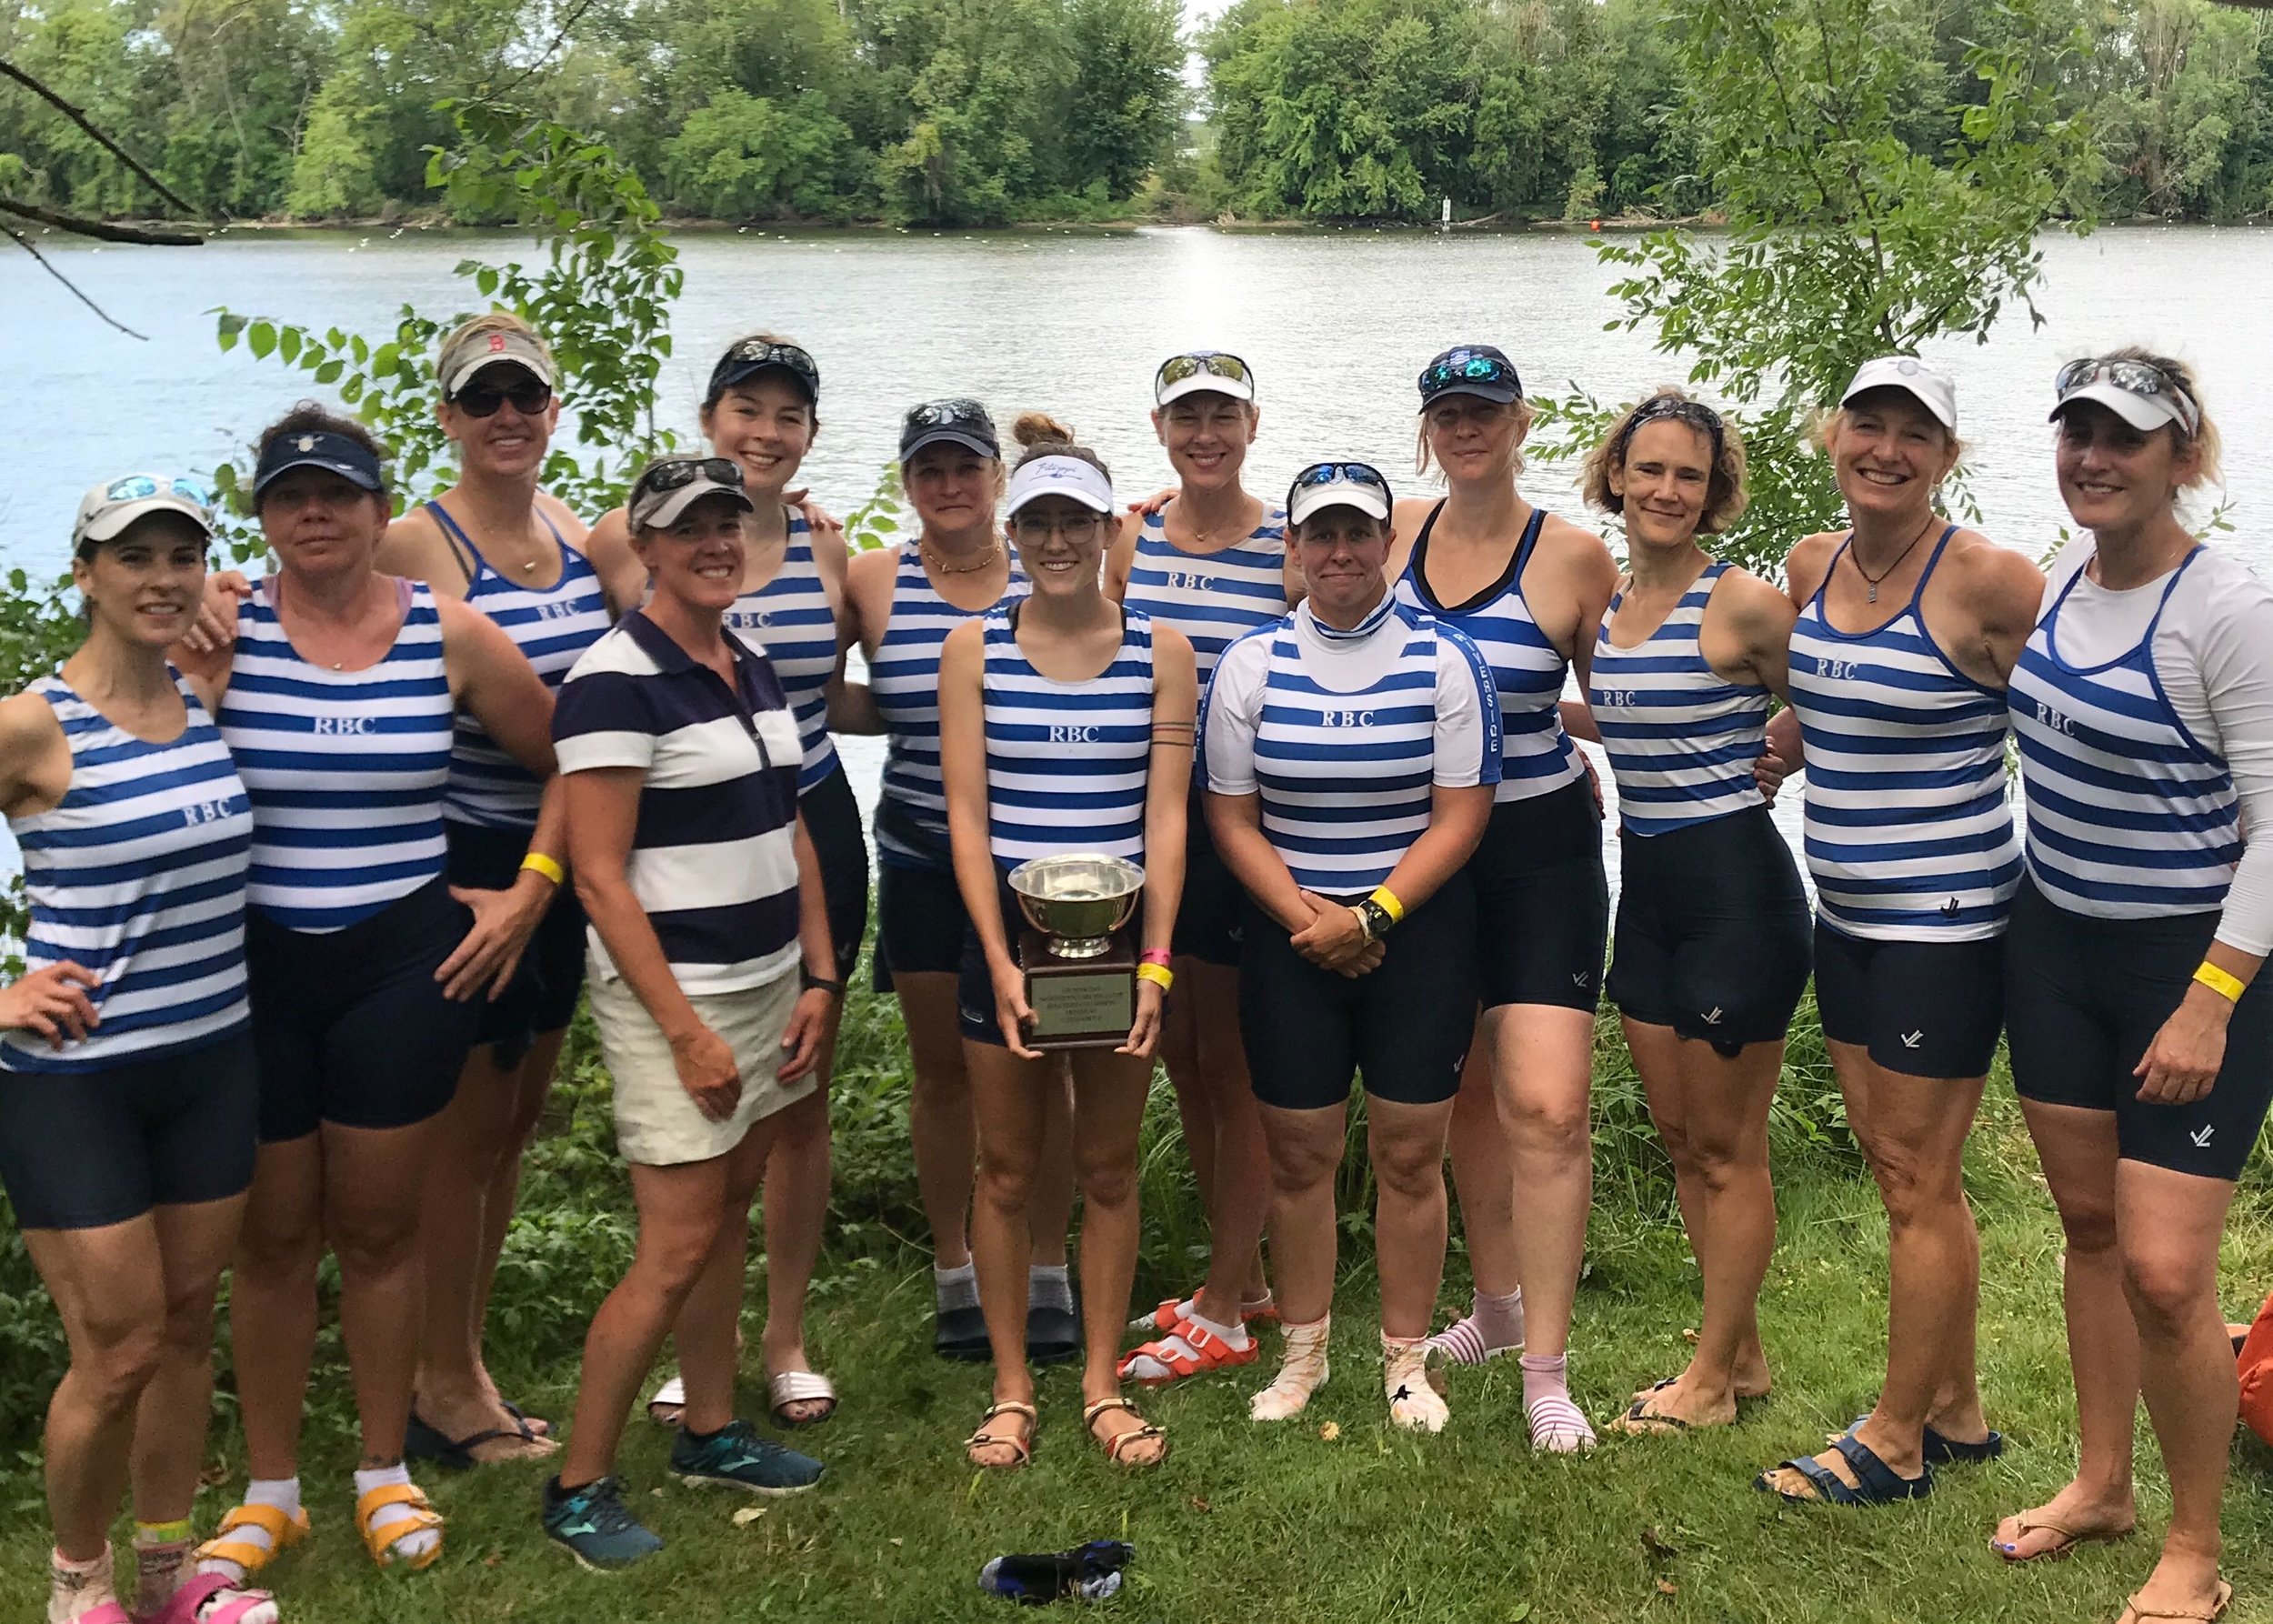 Women's Masters Team and Coach Jessica Smith